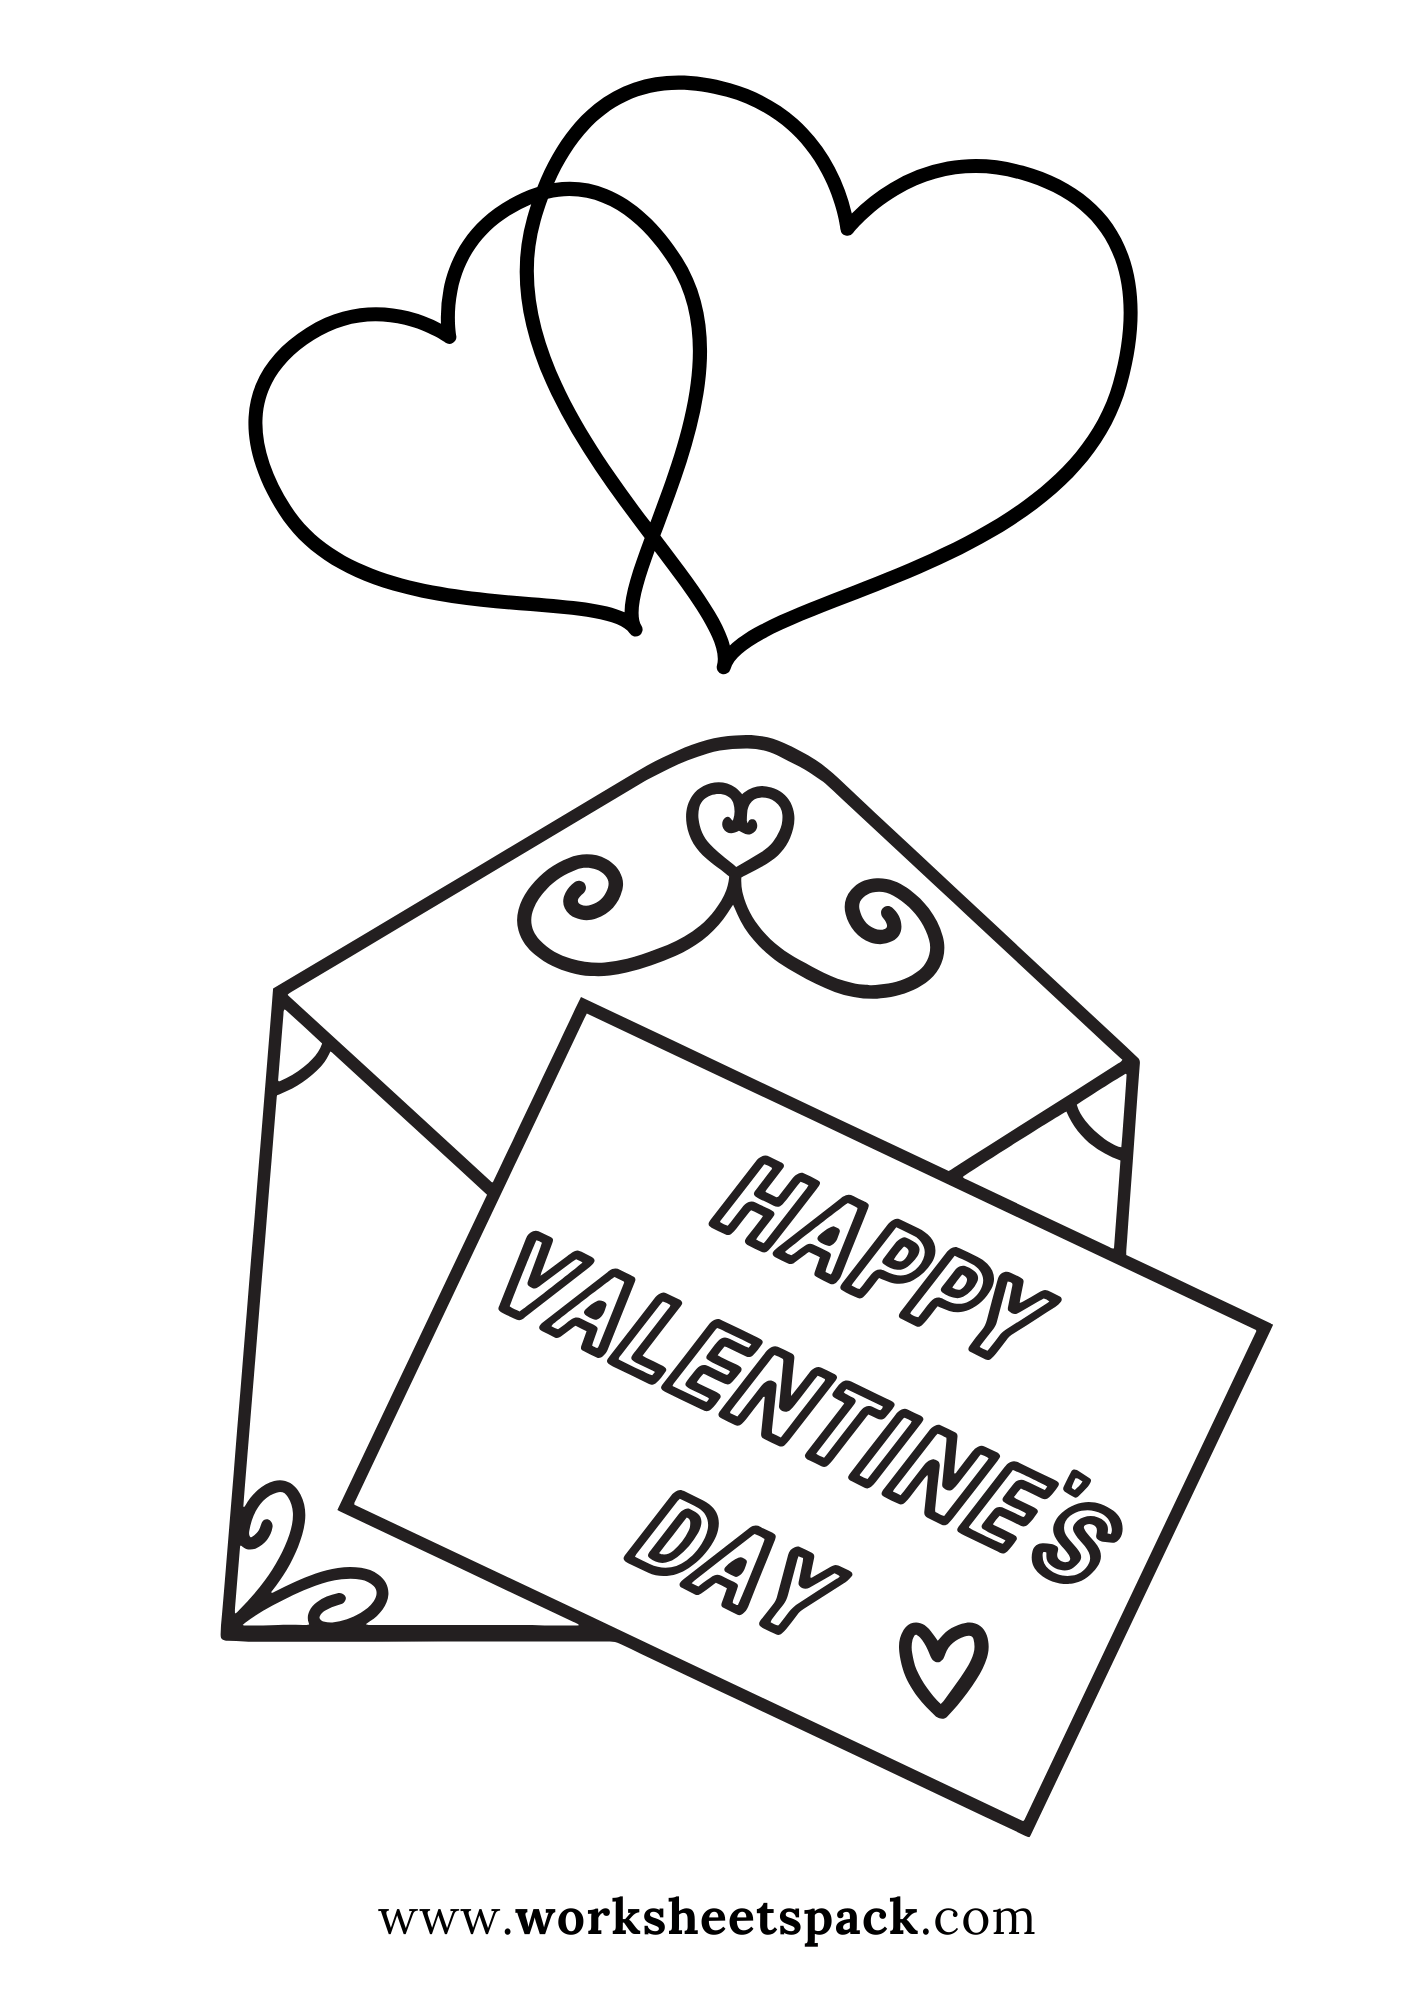 25 Best Free Valentine’s Day Coloring Pages - worksheetspack